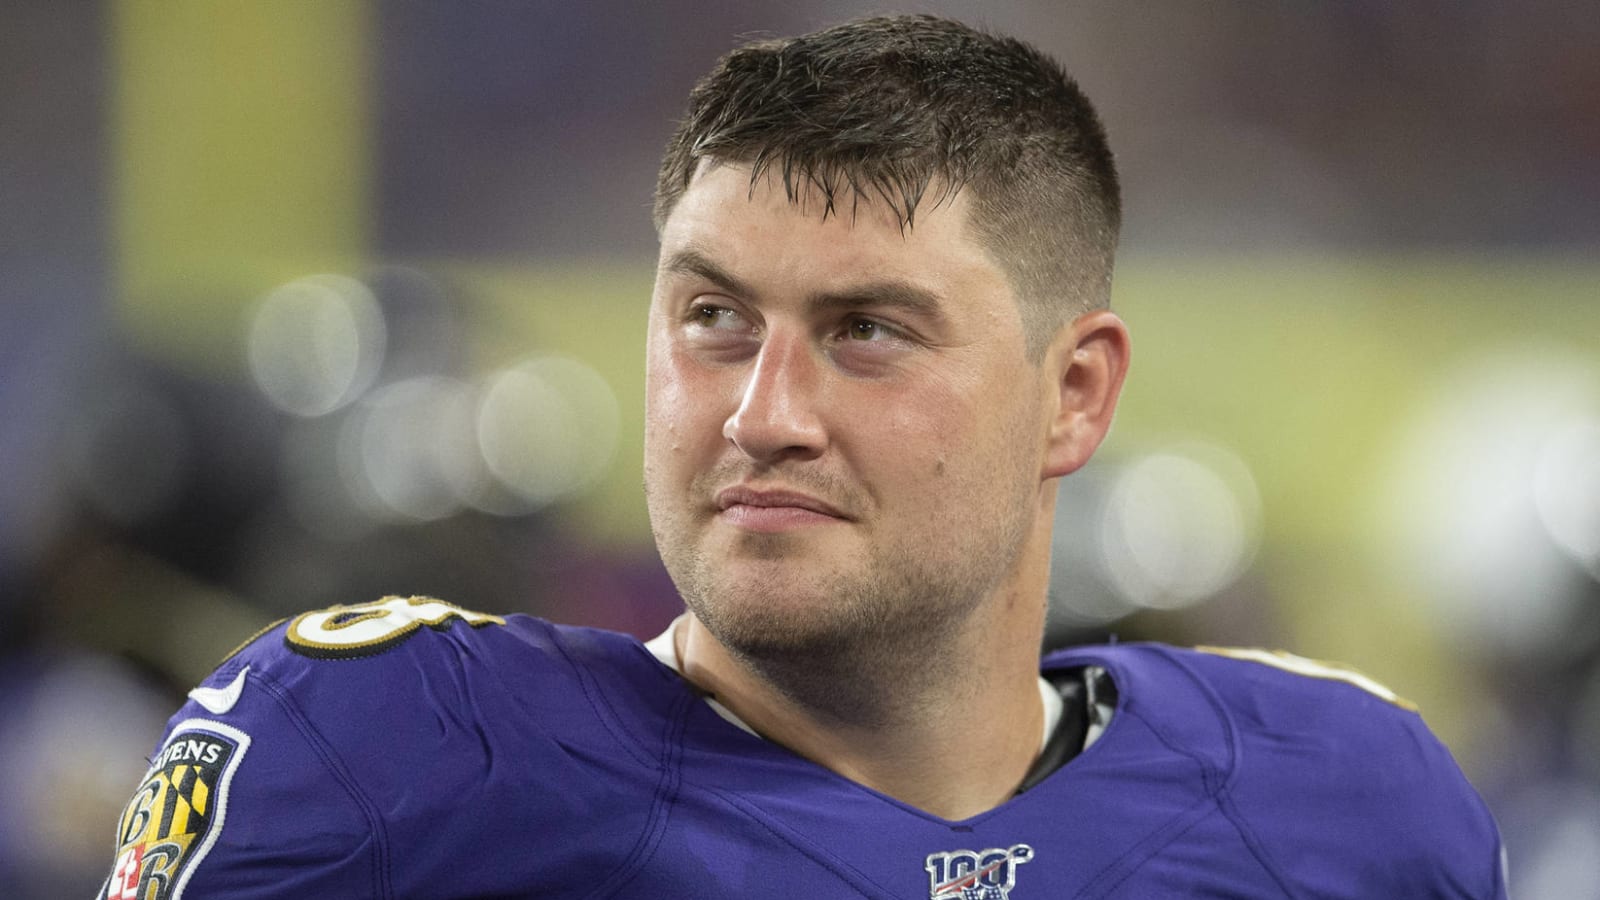 Ravens’ Matt Skura says family received hate messages from fans